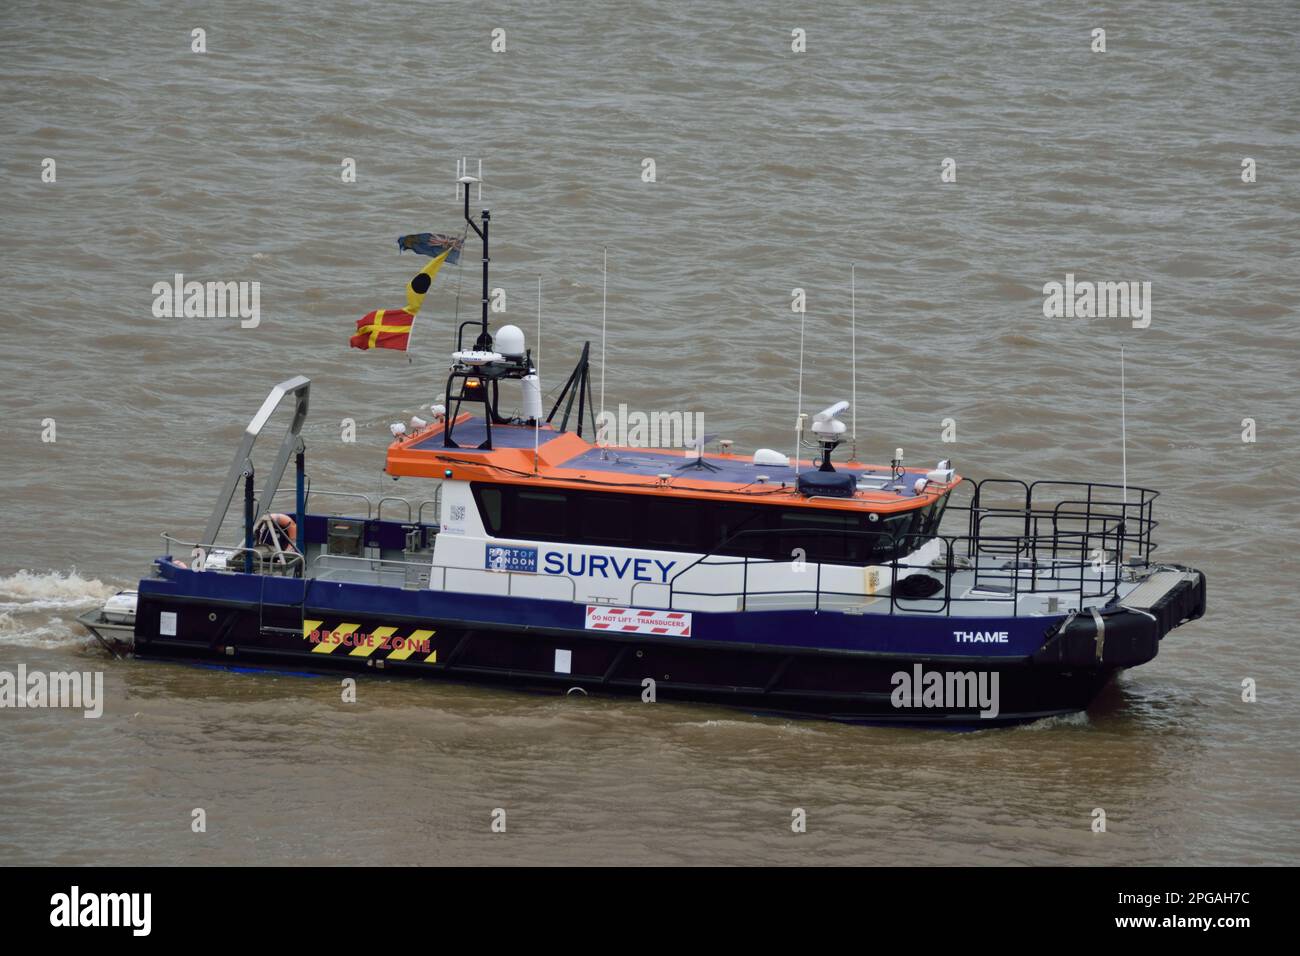 SV Thame operated by the Port of London Authority's Hydrographic Survey Team seen working on the River Thames in East London Stock Photo